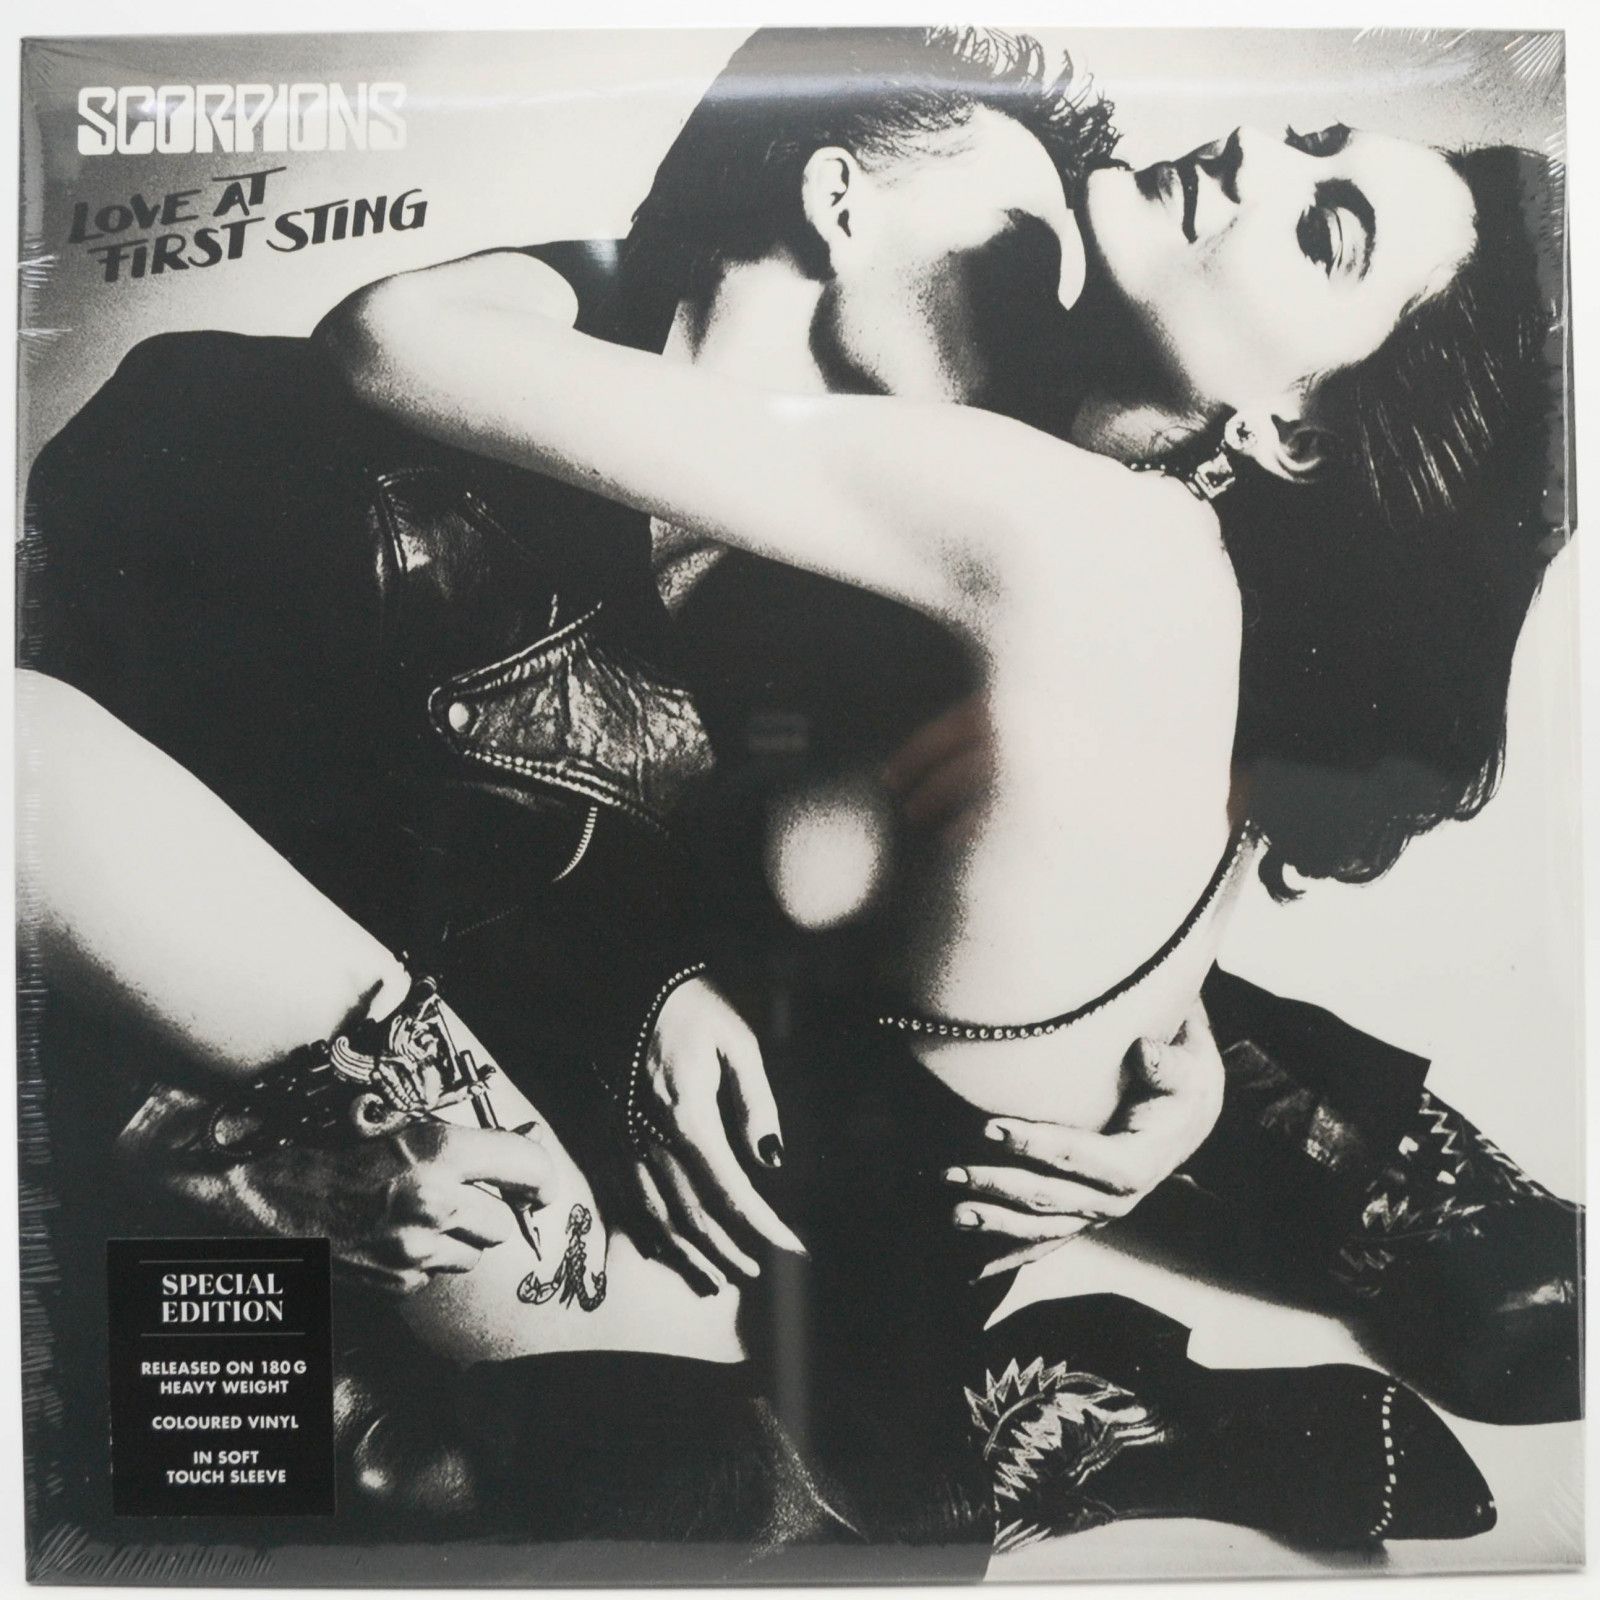 Scorpions — Love At First Sting, 1987